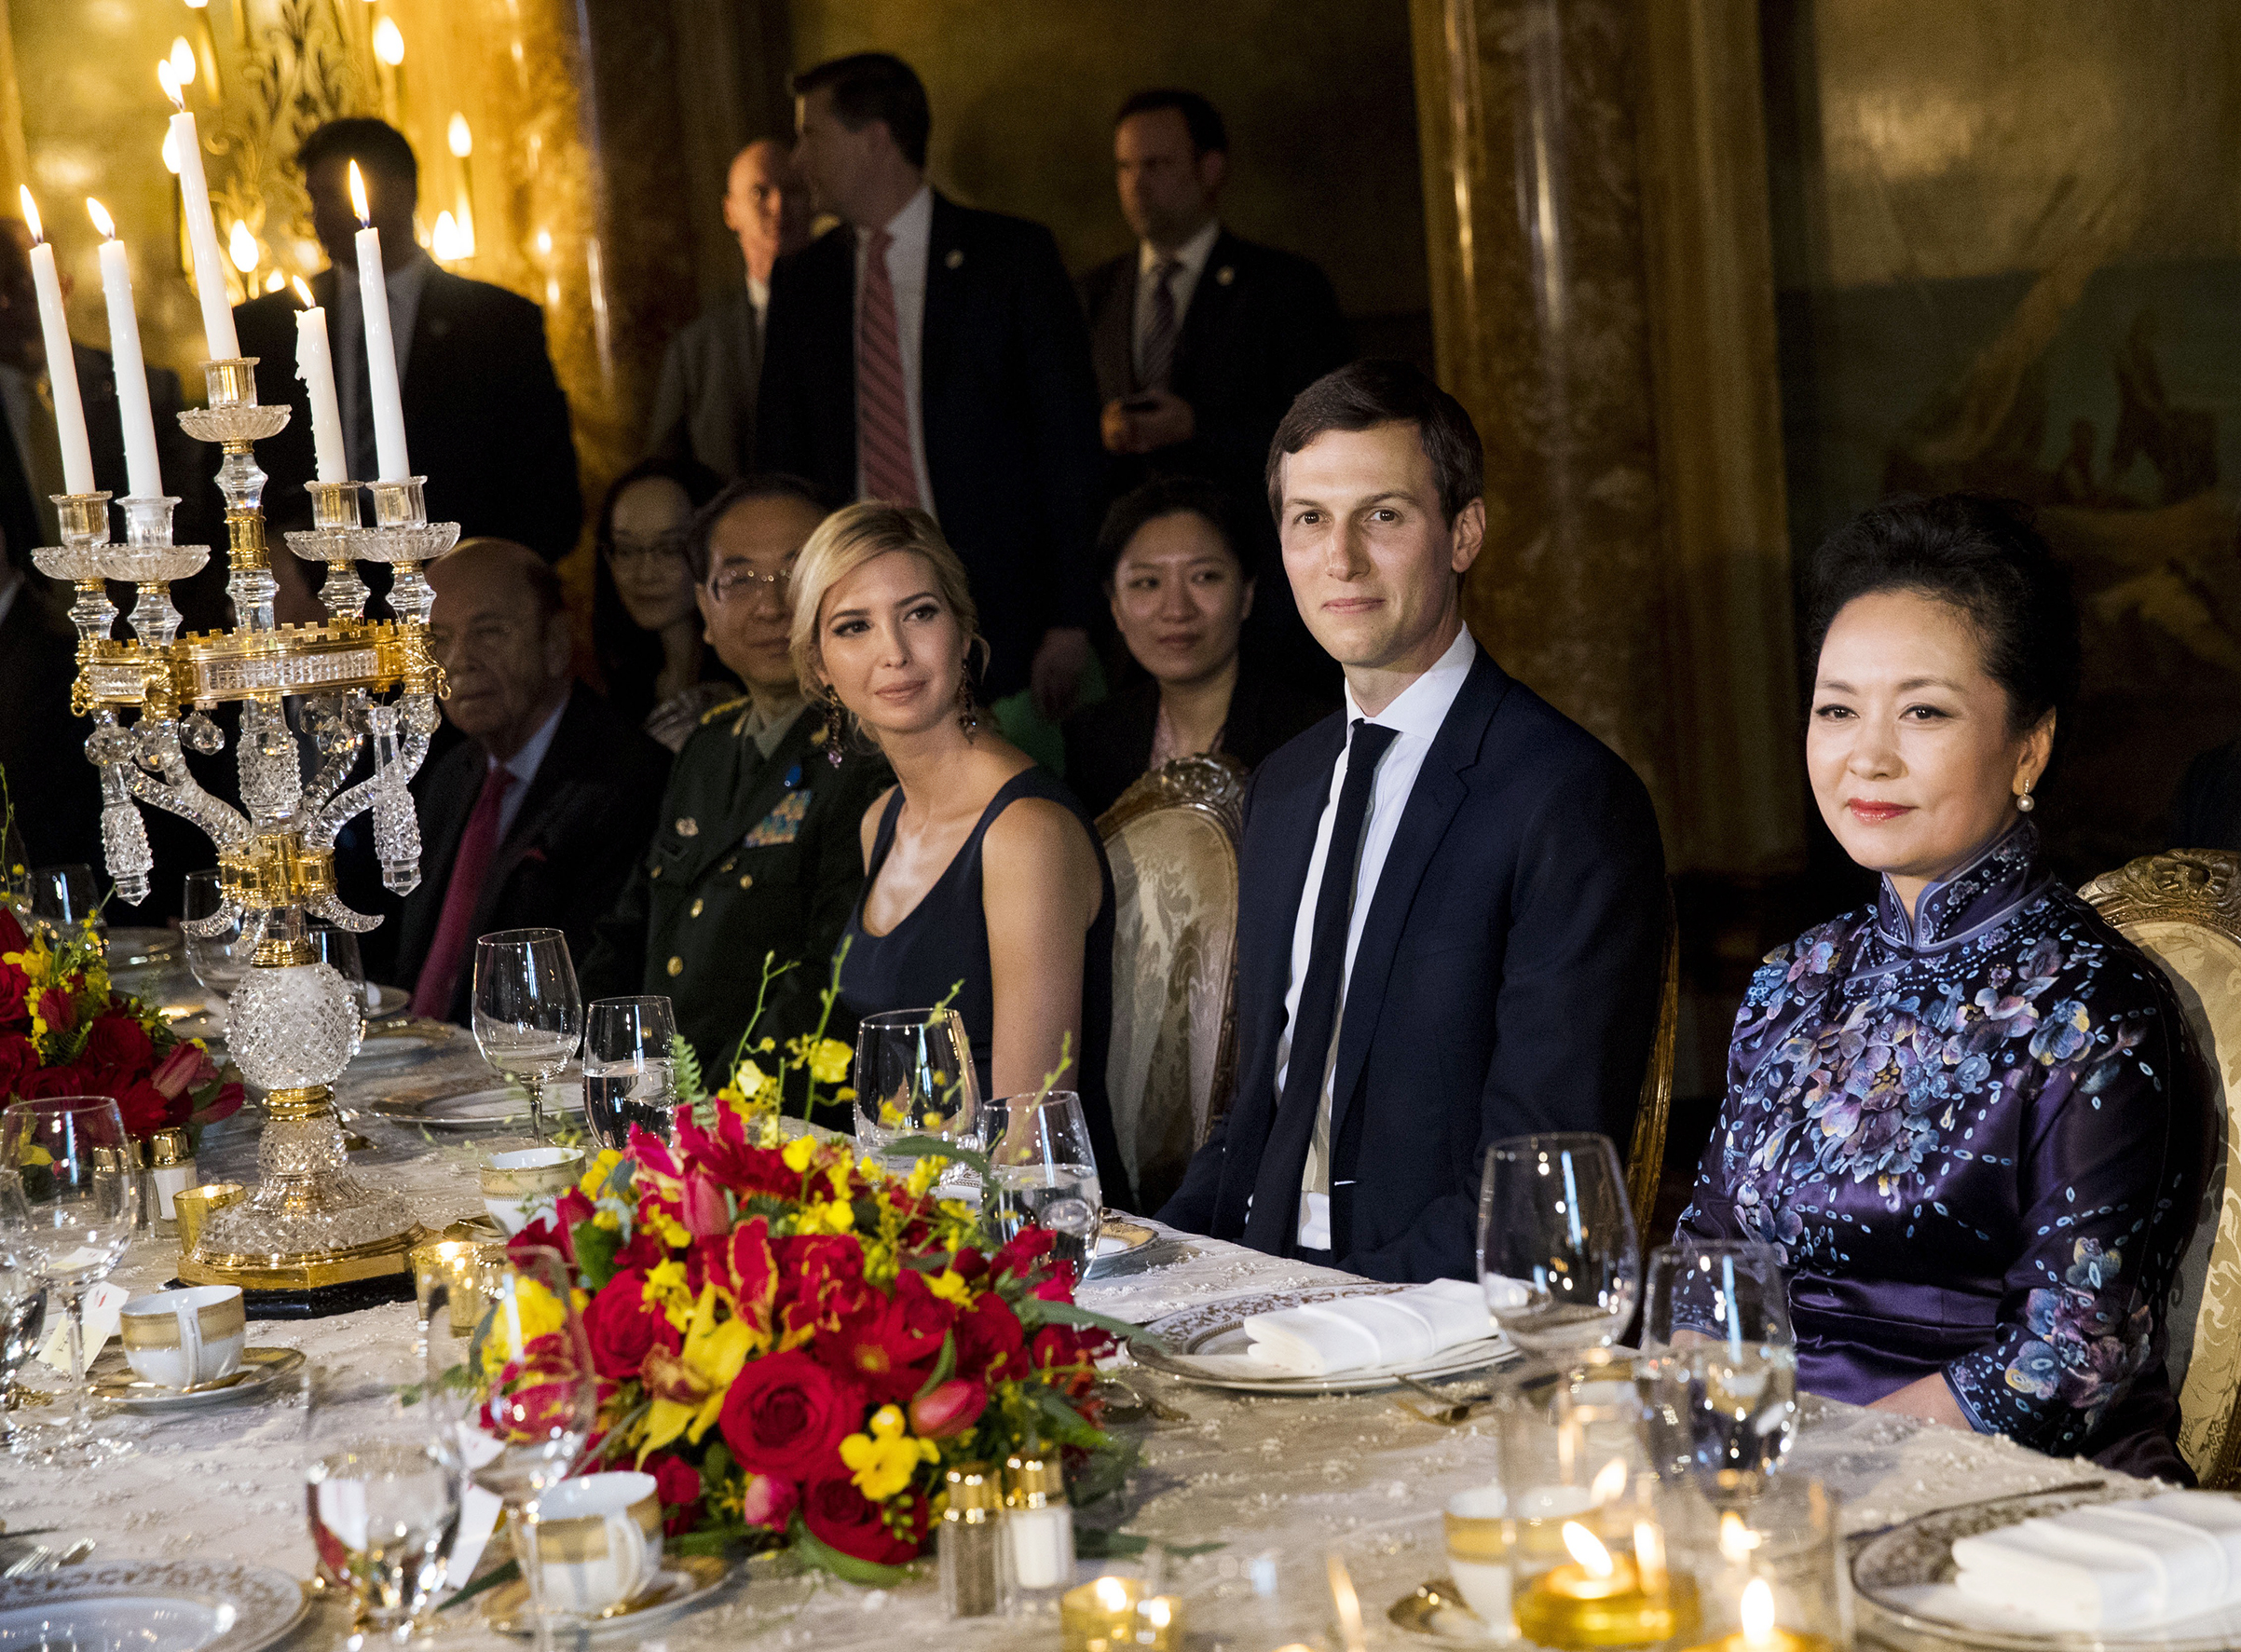 Ivanka Trump and Jared Kushner attend a state dinner with President Xi Jinping of China and his wife at the Mar-a-Lago resort in Palm Beach, Fla., April 6, 2017. (Doug Mills—The New York Times/Redux)